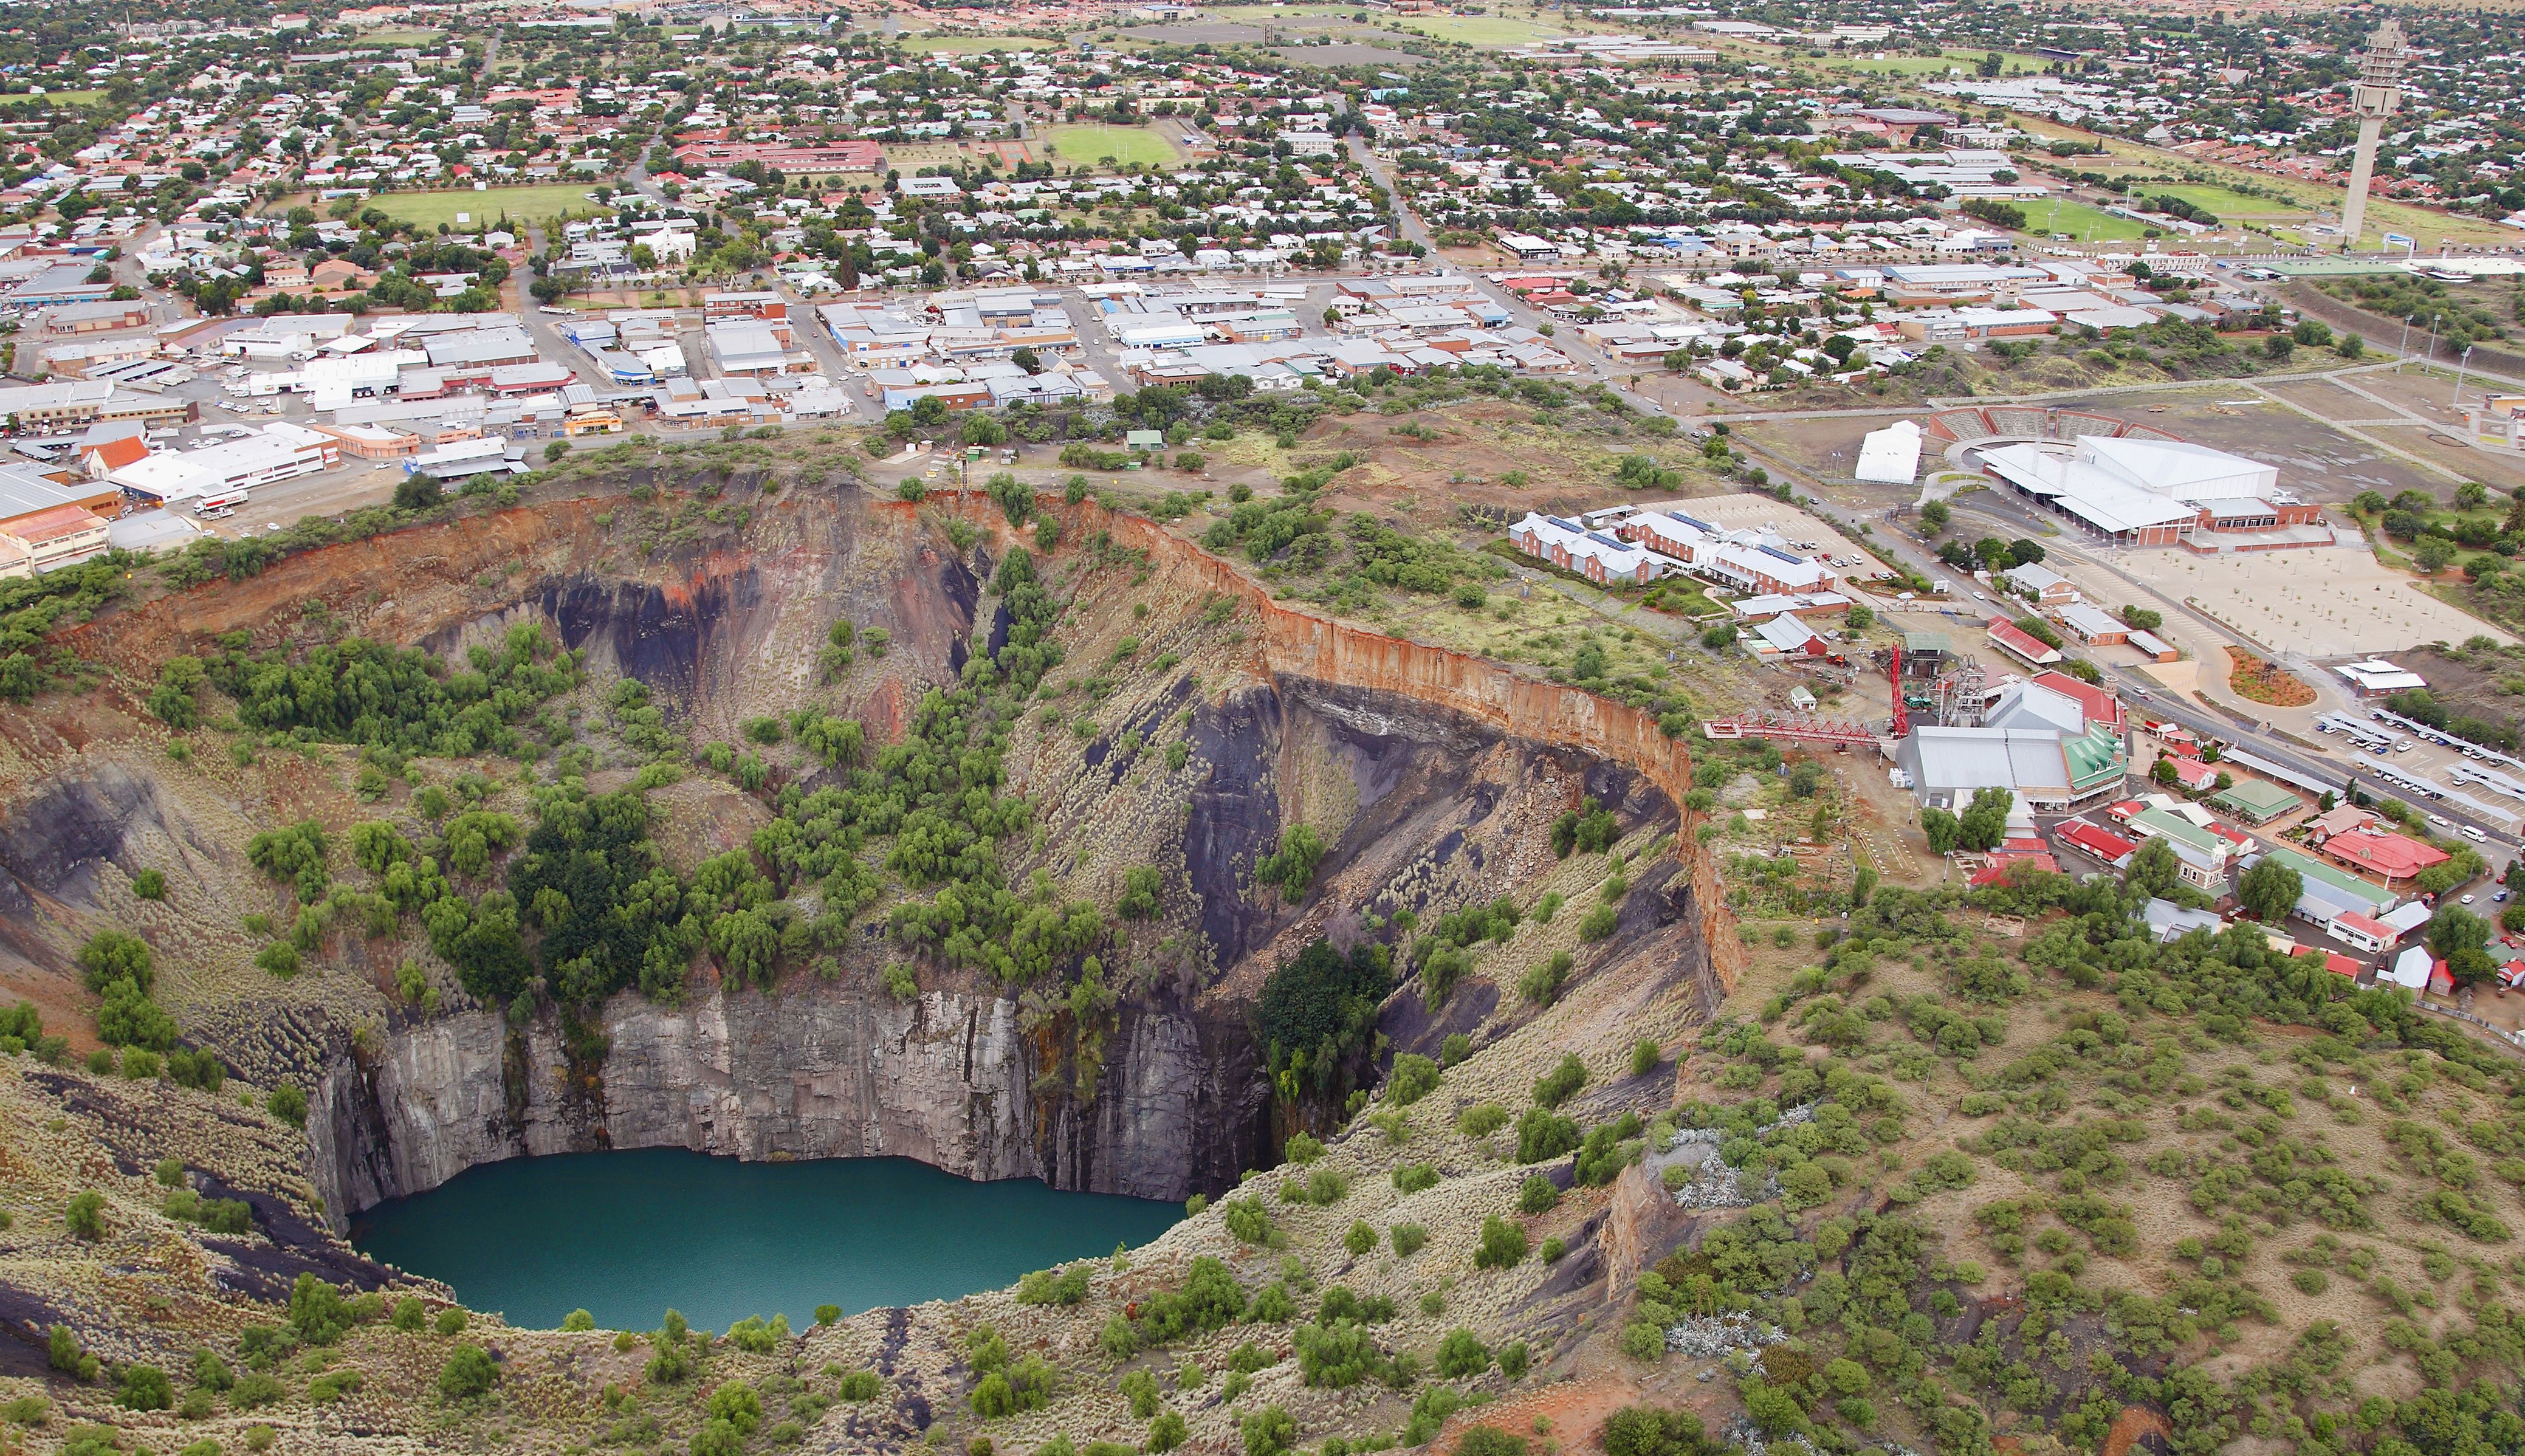 An aerial view of the big hole with Kimberley in the background. Kimberley Northern Cape Province South Africa.